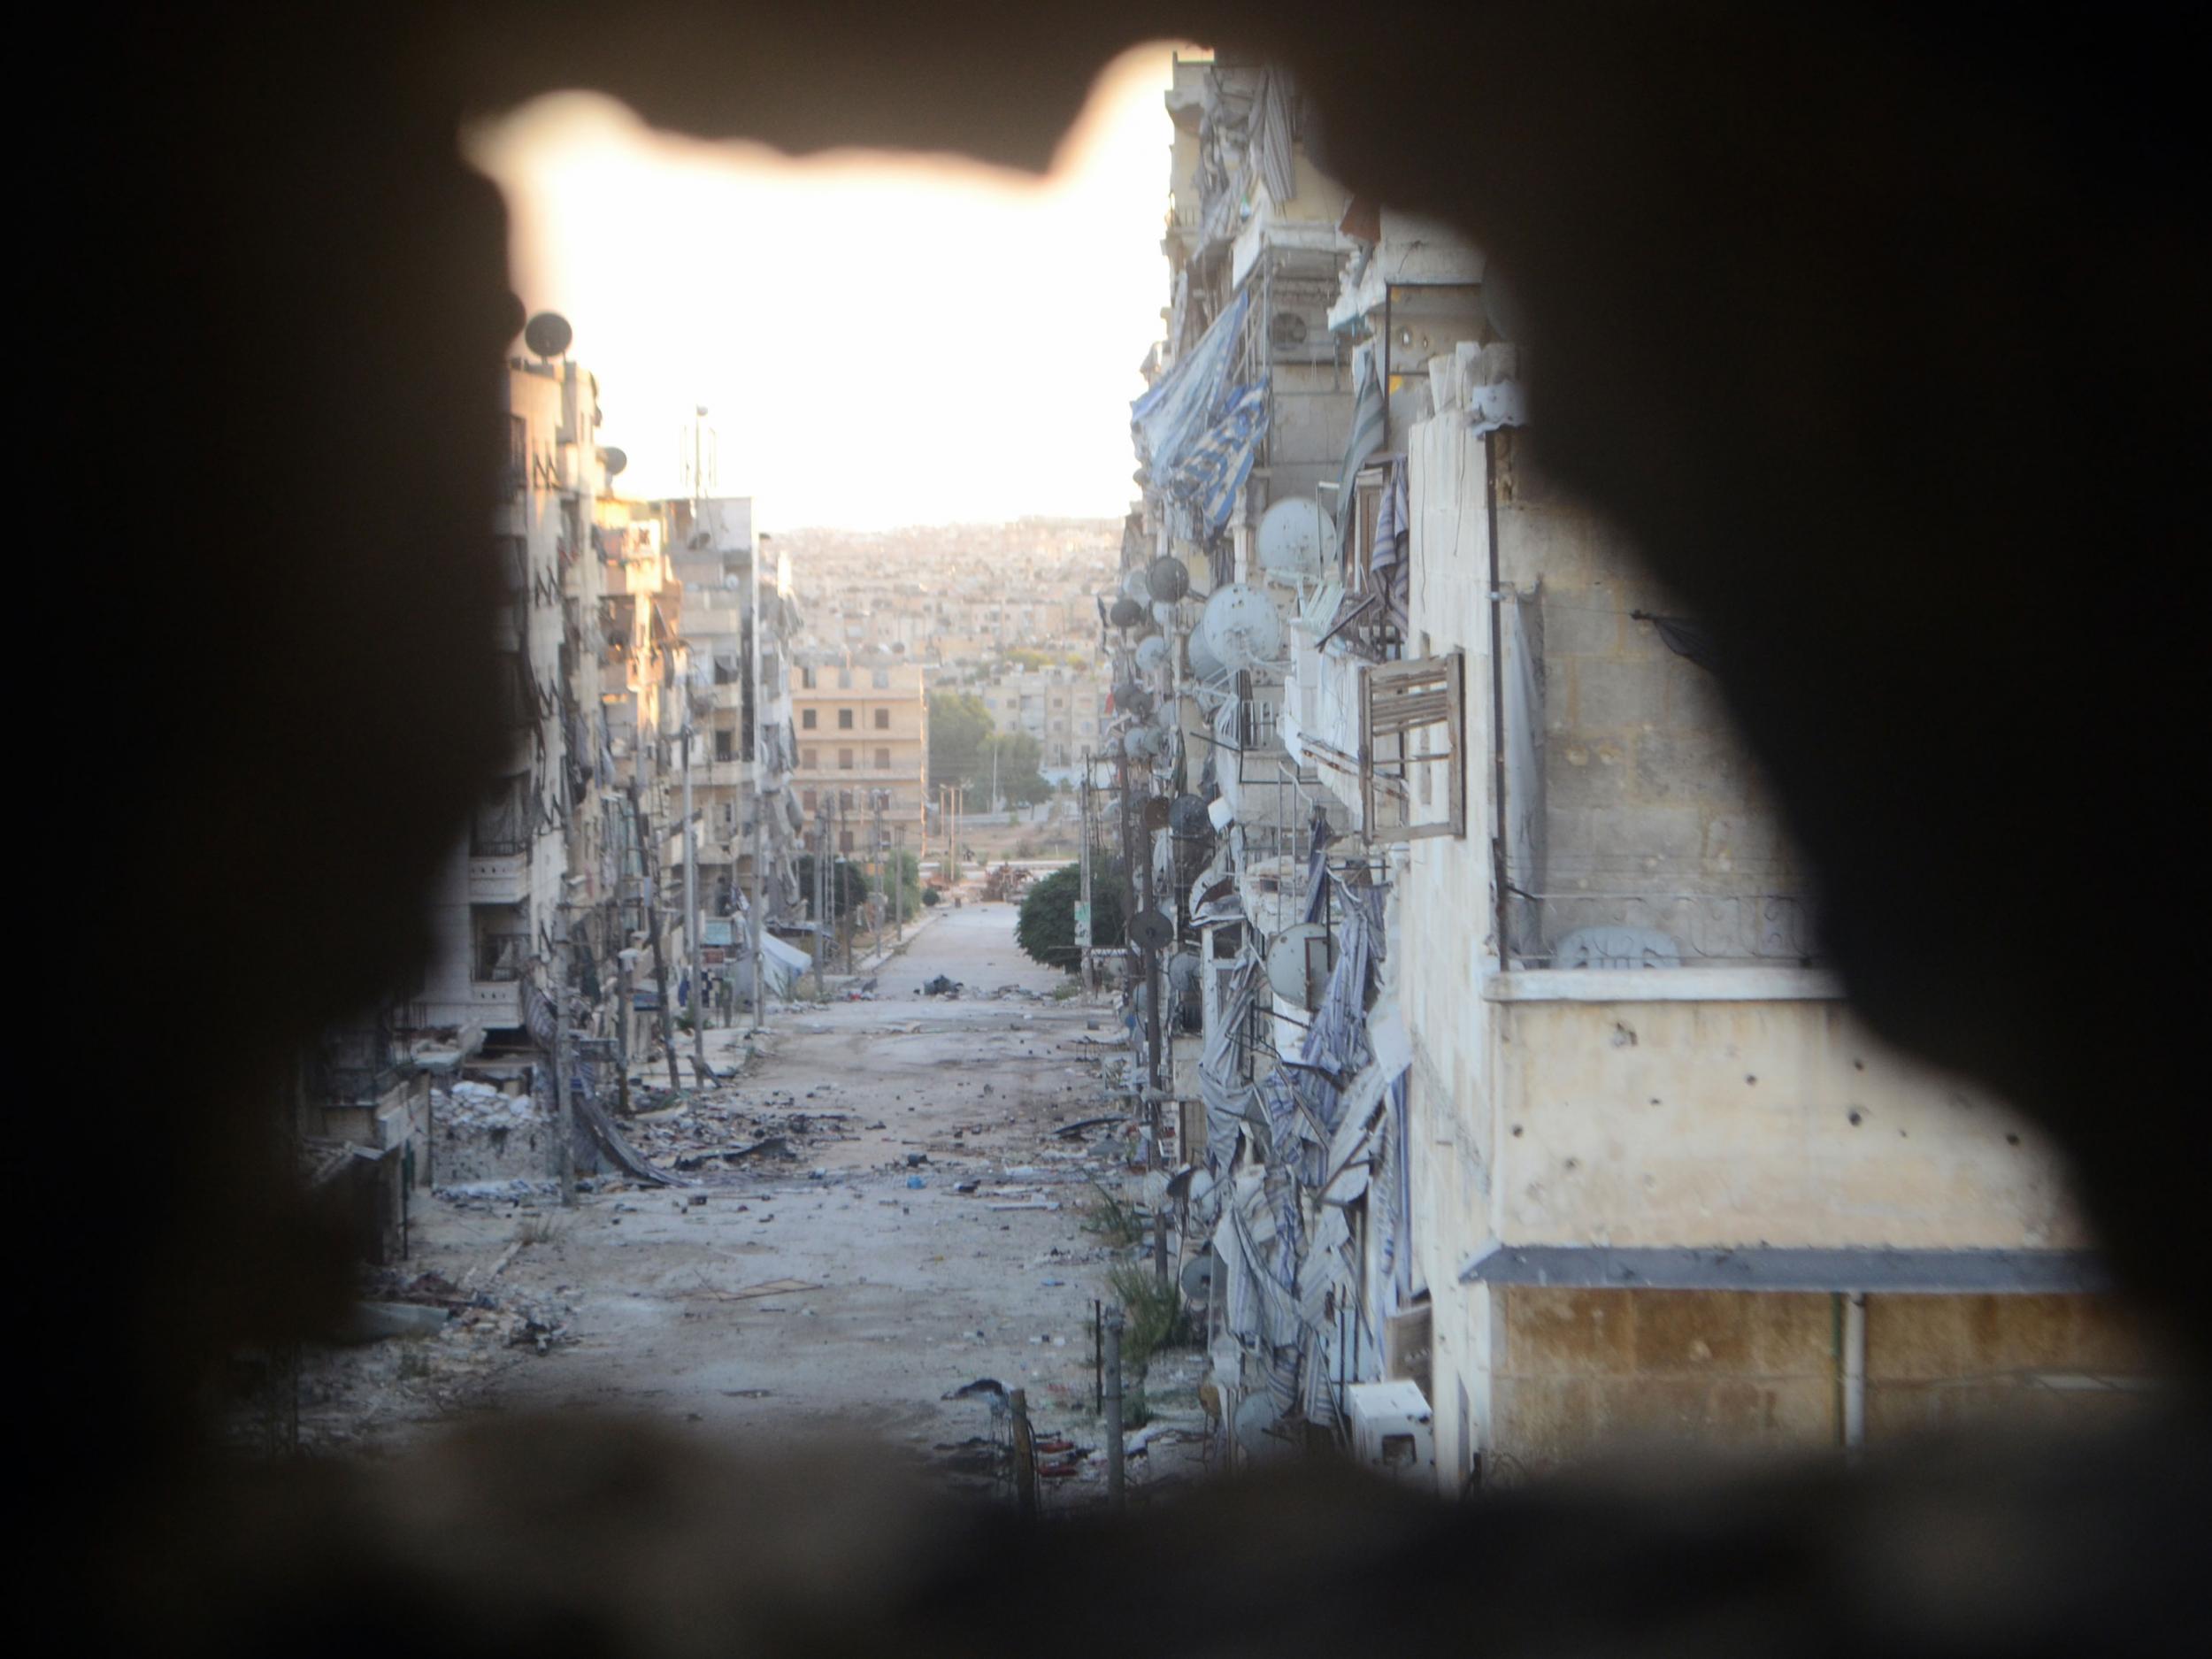 A devastated street in Aleppo after Syrian chemical weapons attack